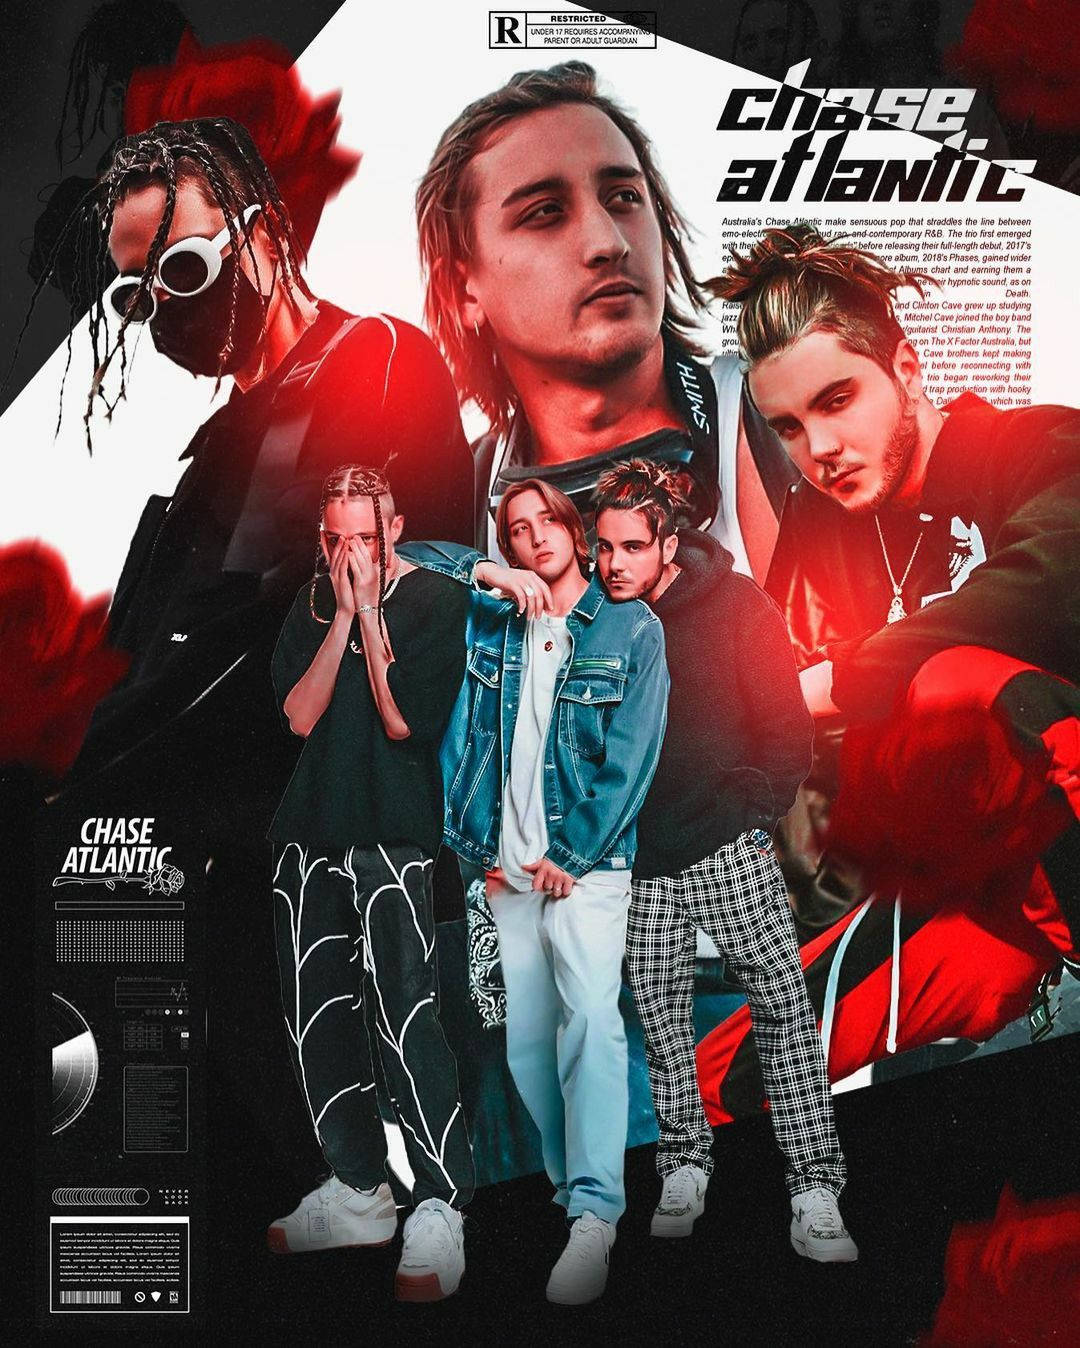 Chase Atlantic wallpaper by MawUC  Download on ZEDGE  02a2